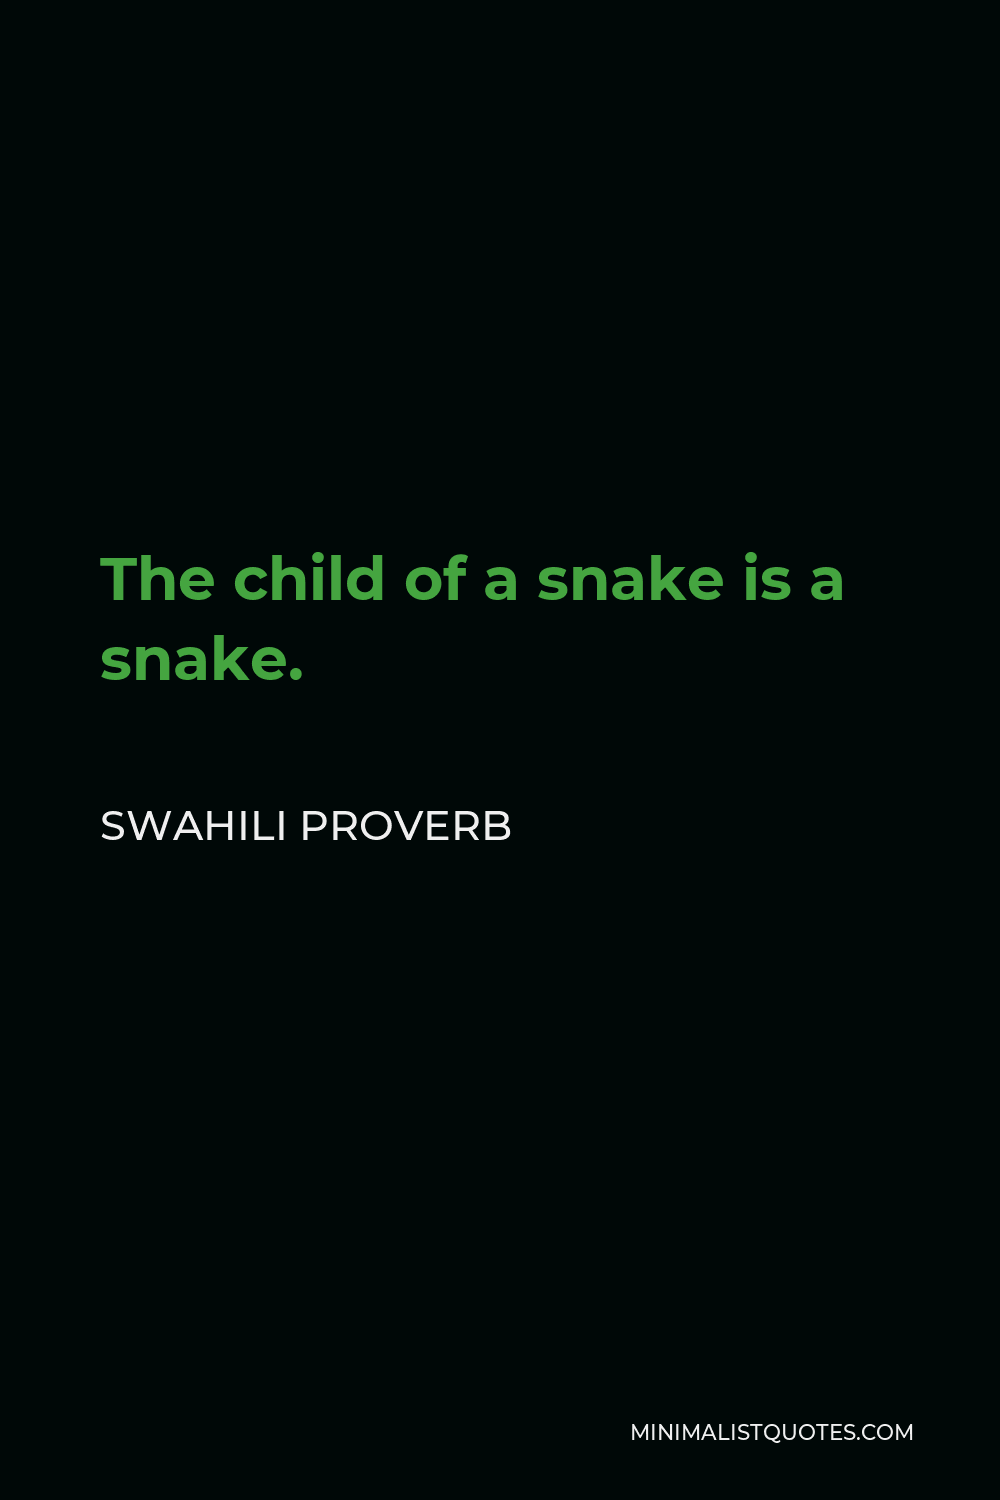 Swahili Proverb Quote - The child of a snake is a snake.